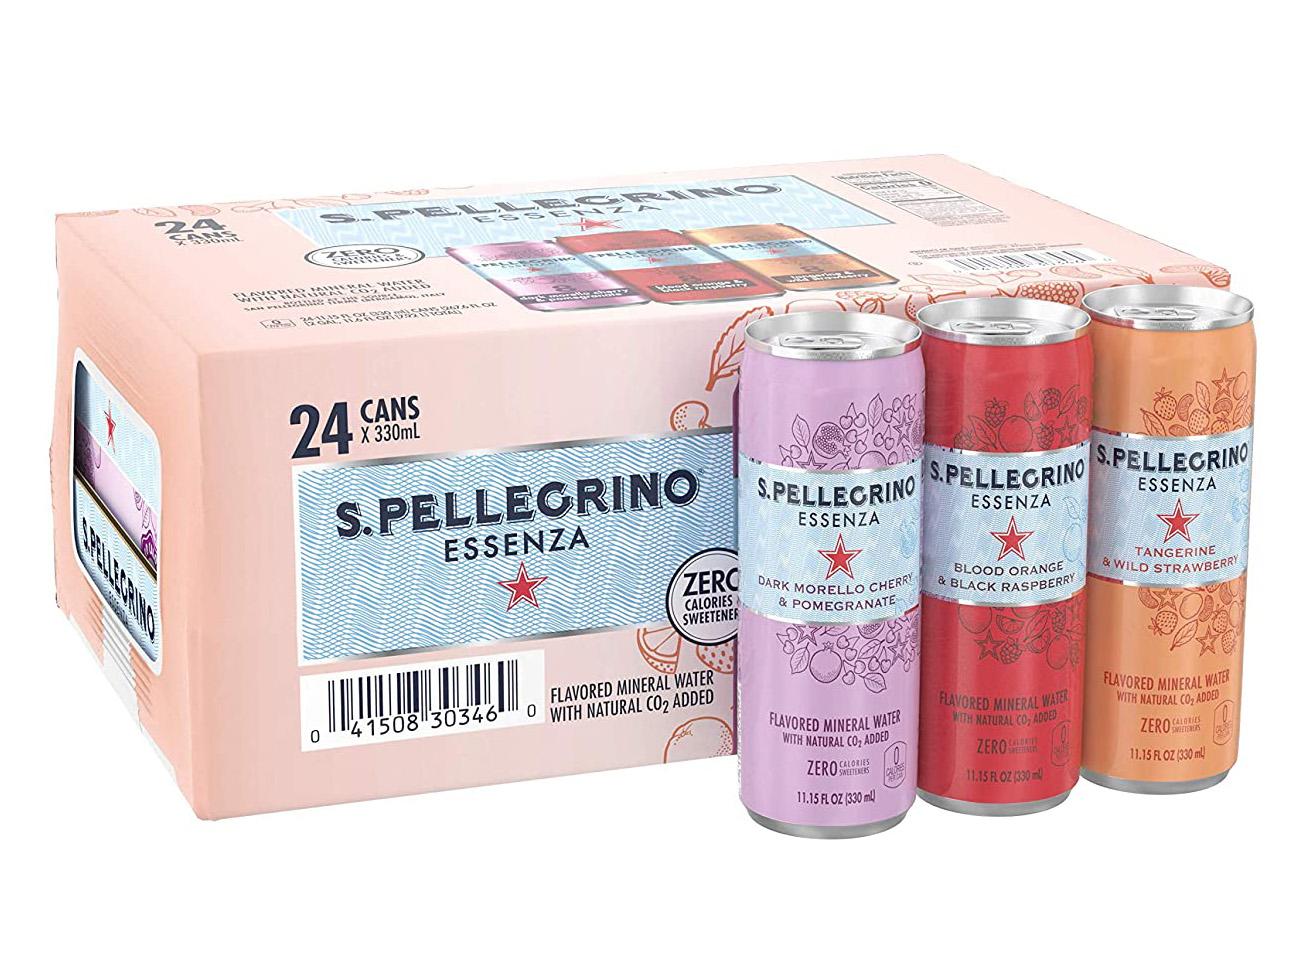 24 S.Pellegrino Essenza Flavored Mineral Water for $10.24 Shipped